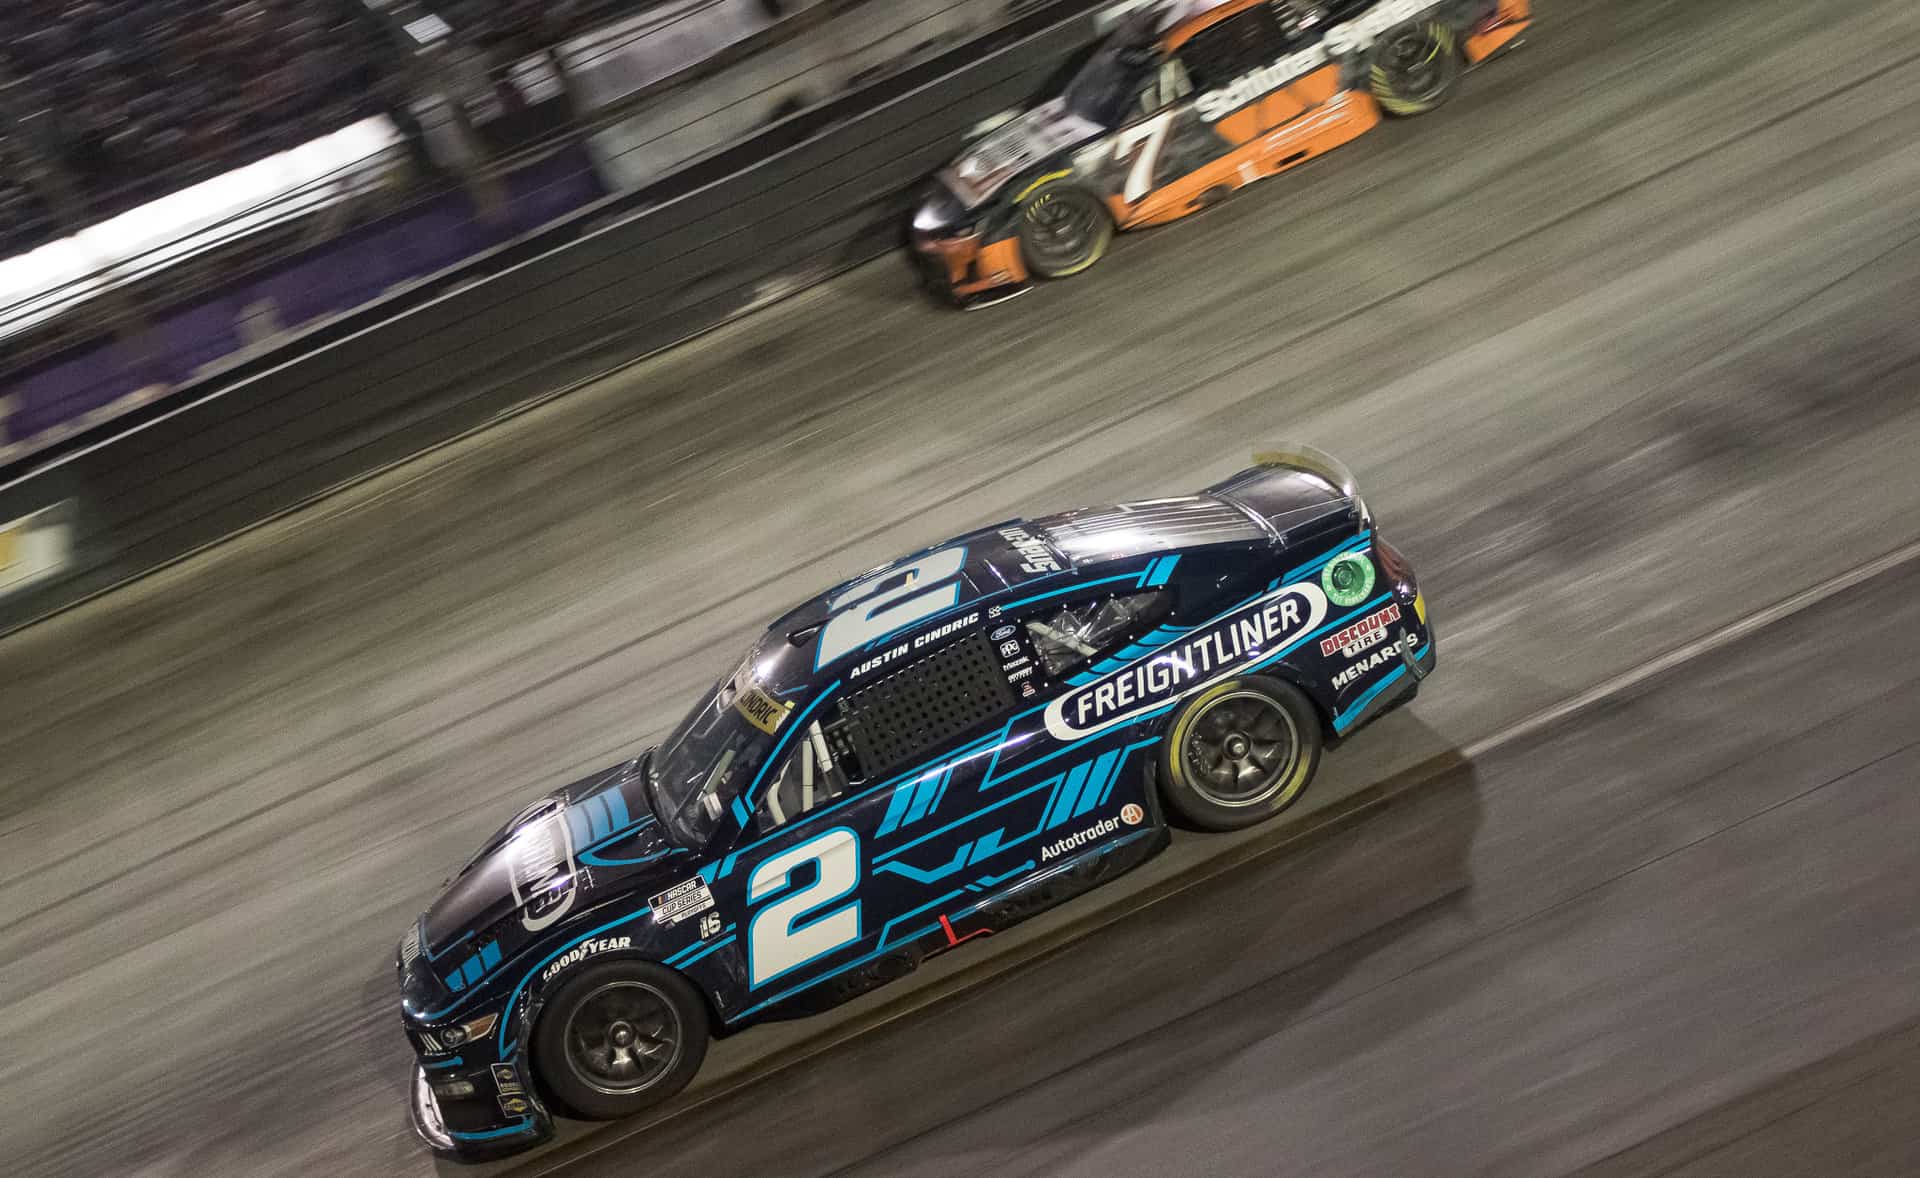 Austin Cindric narrowly advanced to the Round of 12 in NASCAR Playoffs after a miserable night at Bristol Motor Speedway.